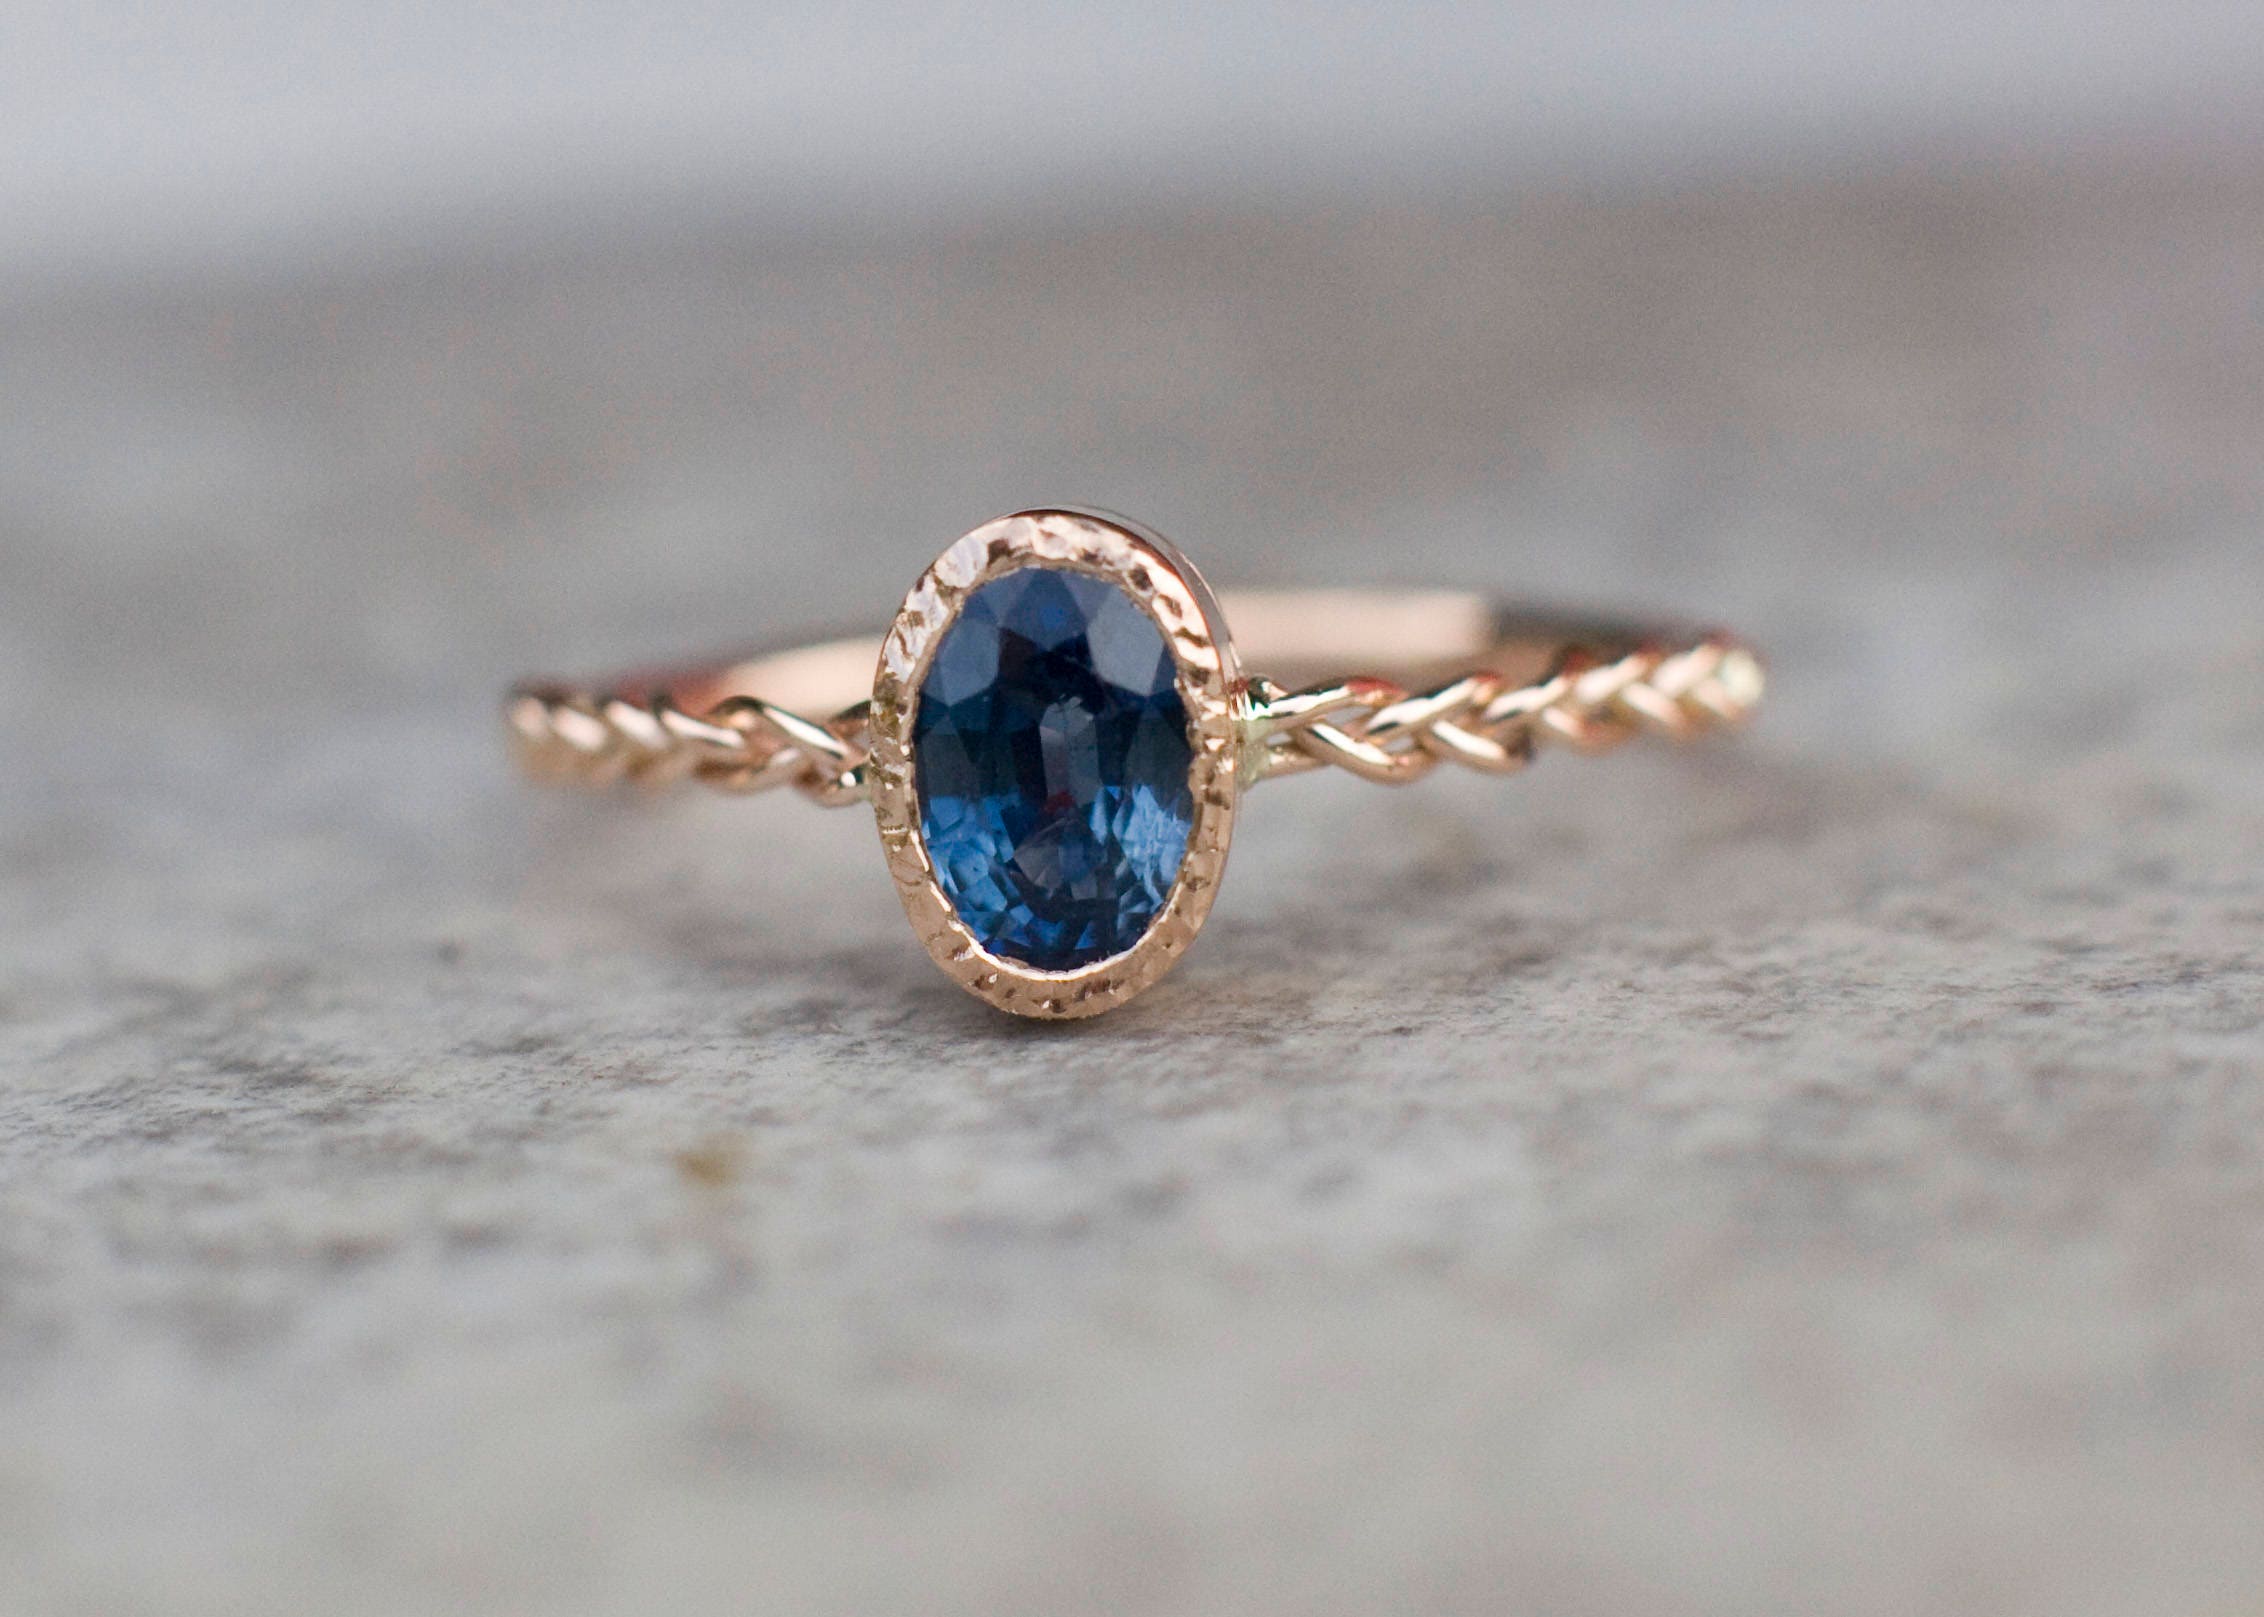 Details about   2ct Oval Cut Blue Sapphire Wedding Bridal Designer Promise Ring 14k Yellow Gold 